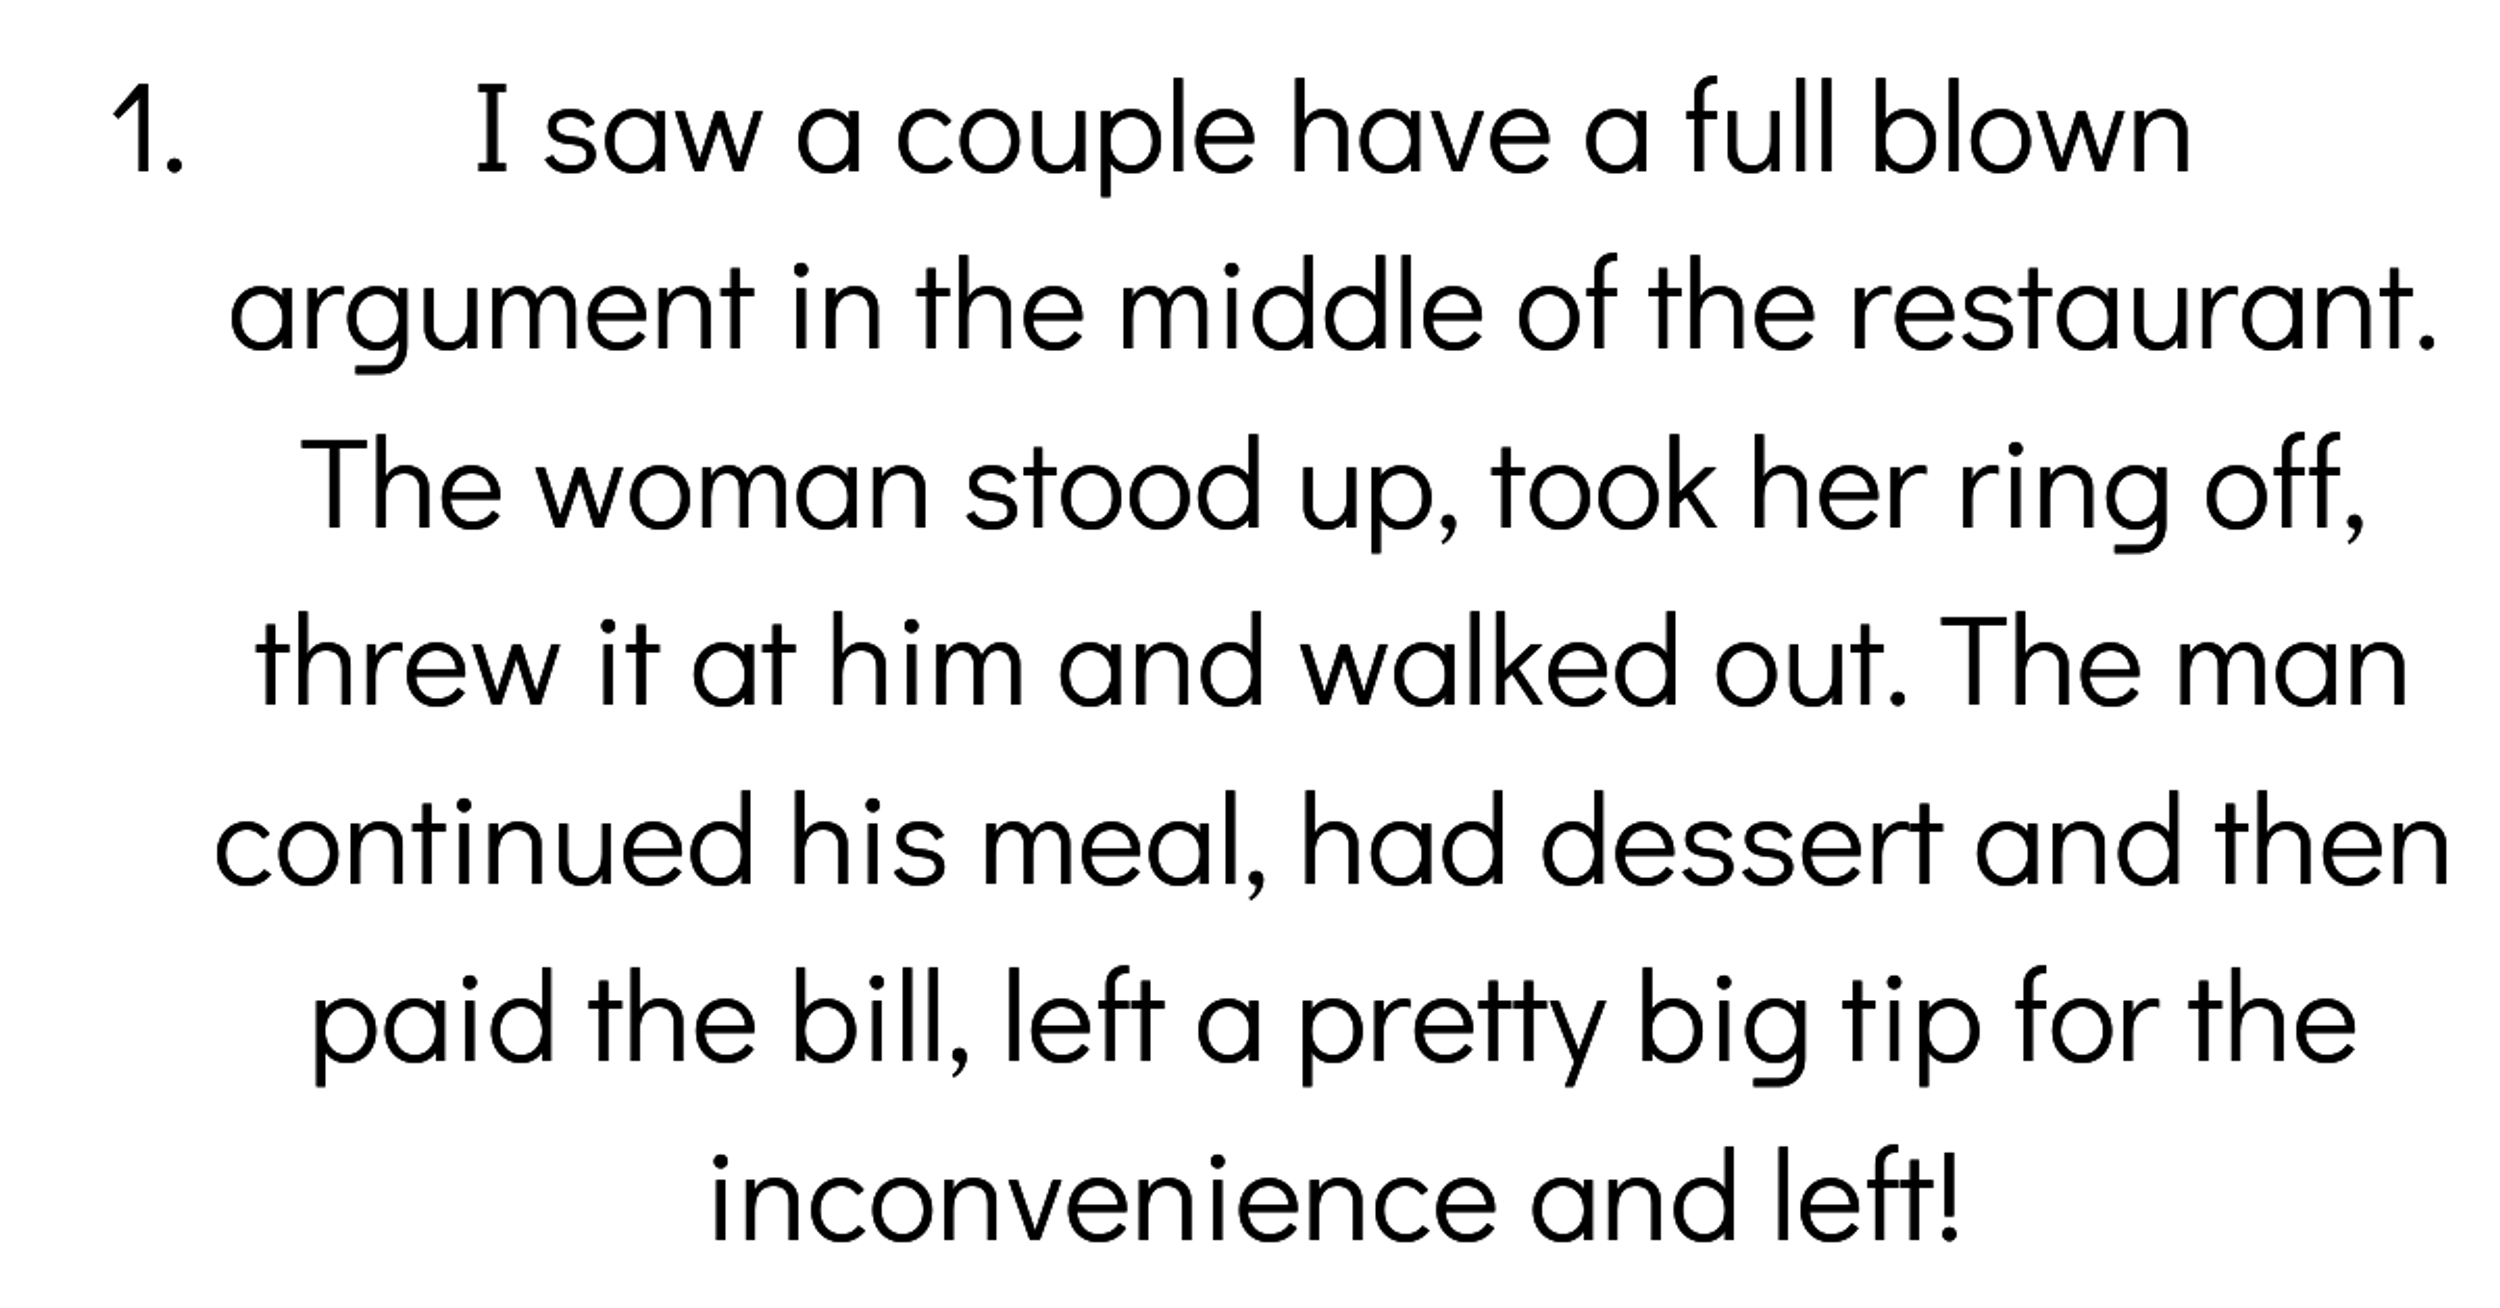 Waiters Divulge The Worst Valentine's Day Disasters They've Ever Witnessed At Their Restaurant